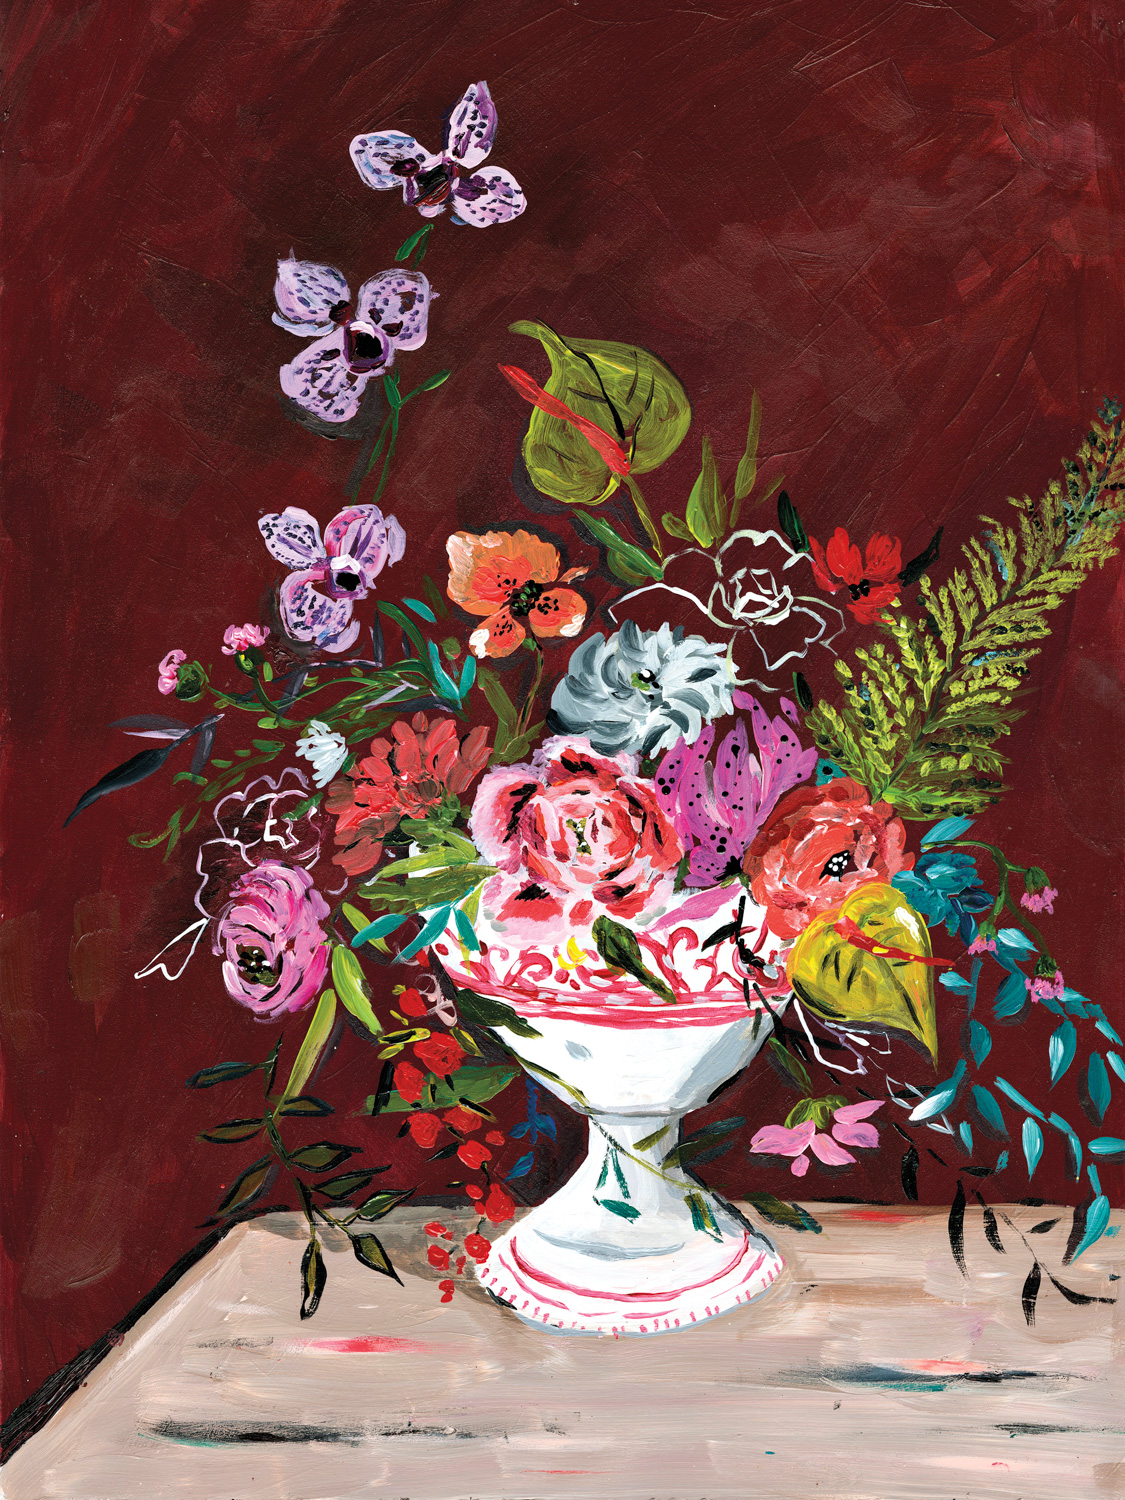 Painting of wild and colorful flower arrangement in Bari J. Ackerman feed